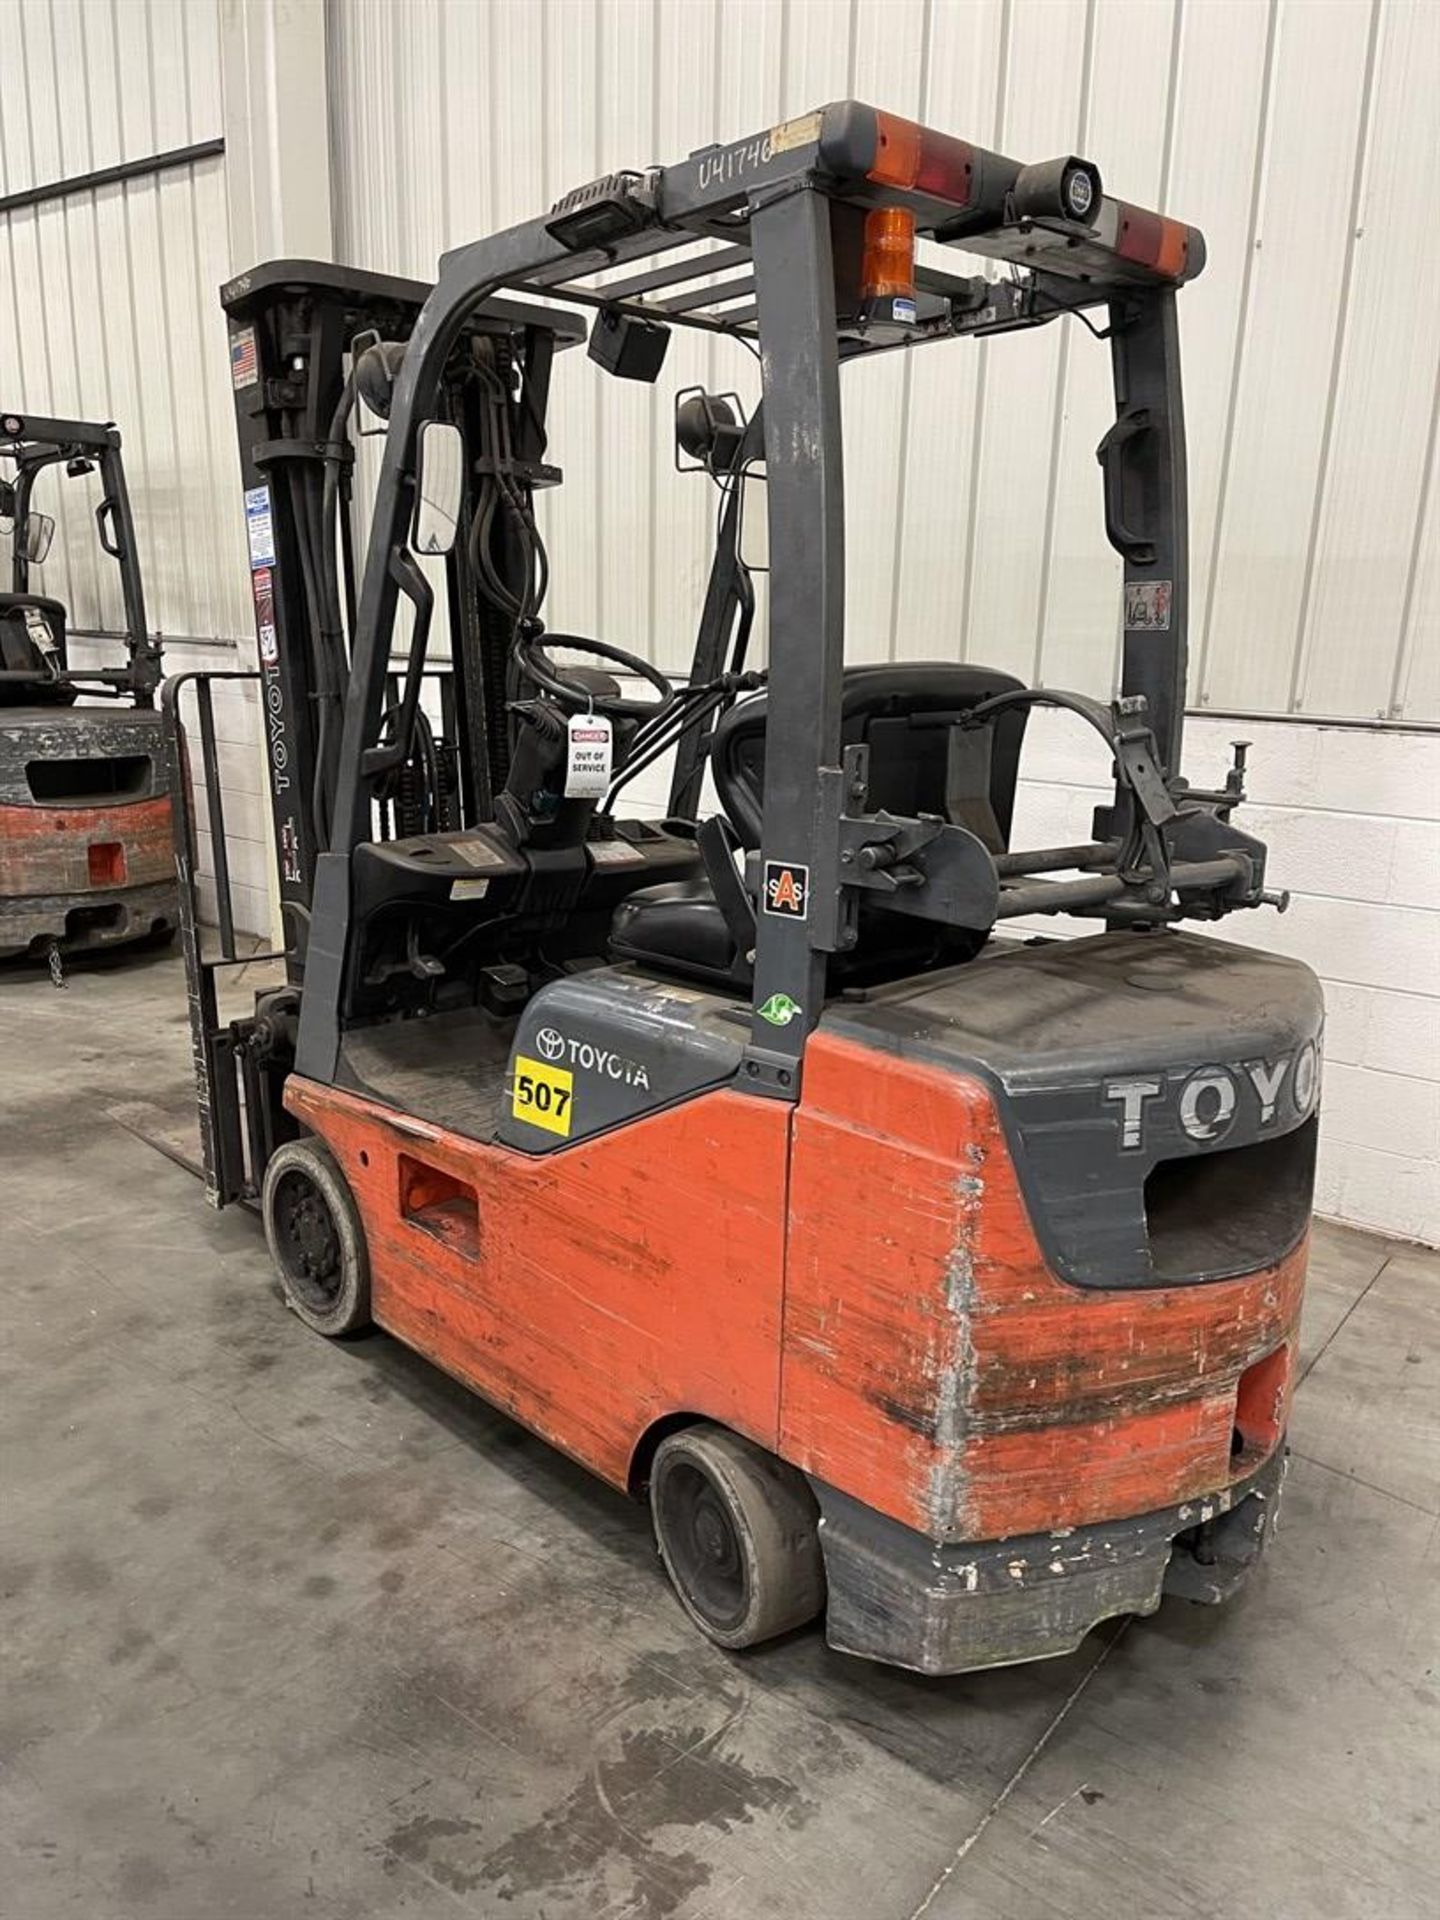 TOYOTA 8FGCSU20 LP Forklift, s/n 11128, 4,000 Lb. Capacity, Side Shift, 3-Stage Mast, Cushion - Image 3 of 6